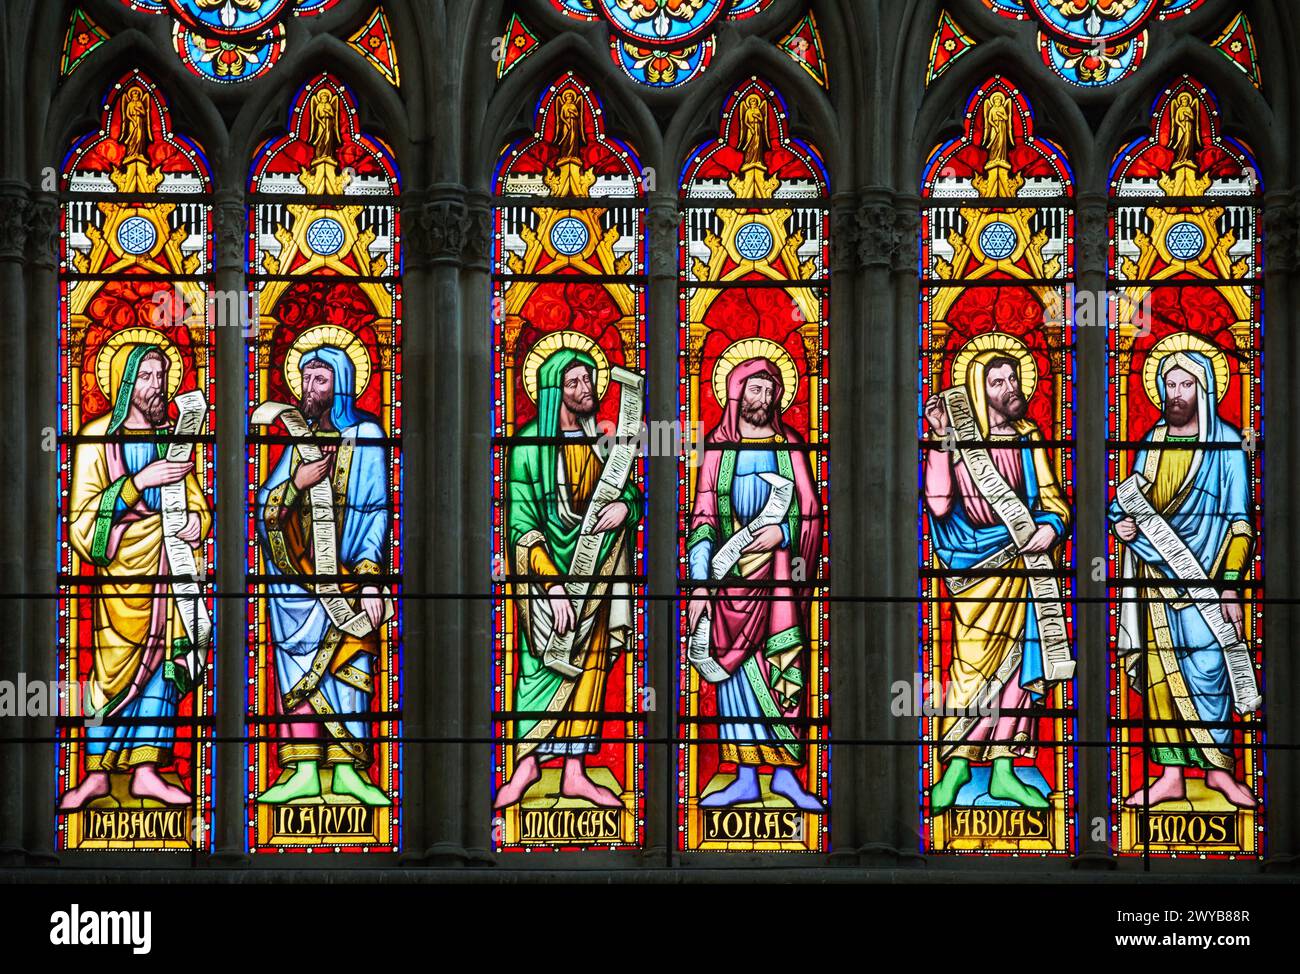 Vetrate colorate, Cattedrale Saint-Pierre Saint-Paul, Troyes, regione Champagne-Ardenne, dipartimento Aube, Francia, Europa. Foto Stock